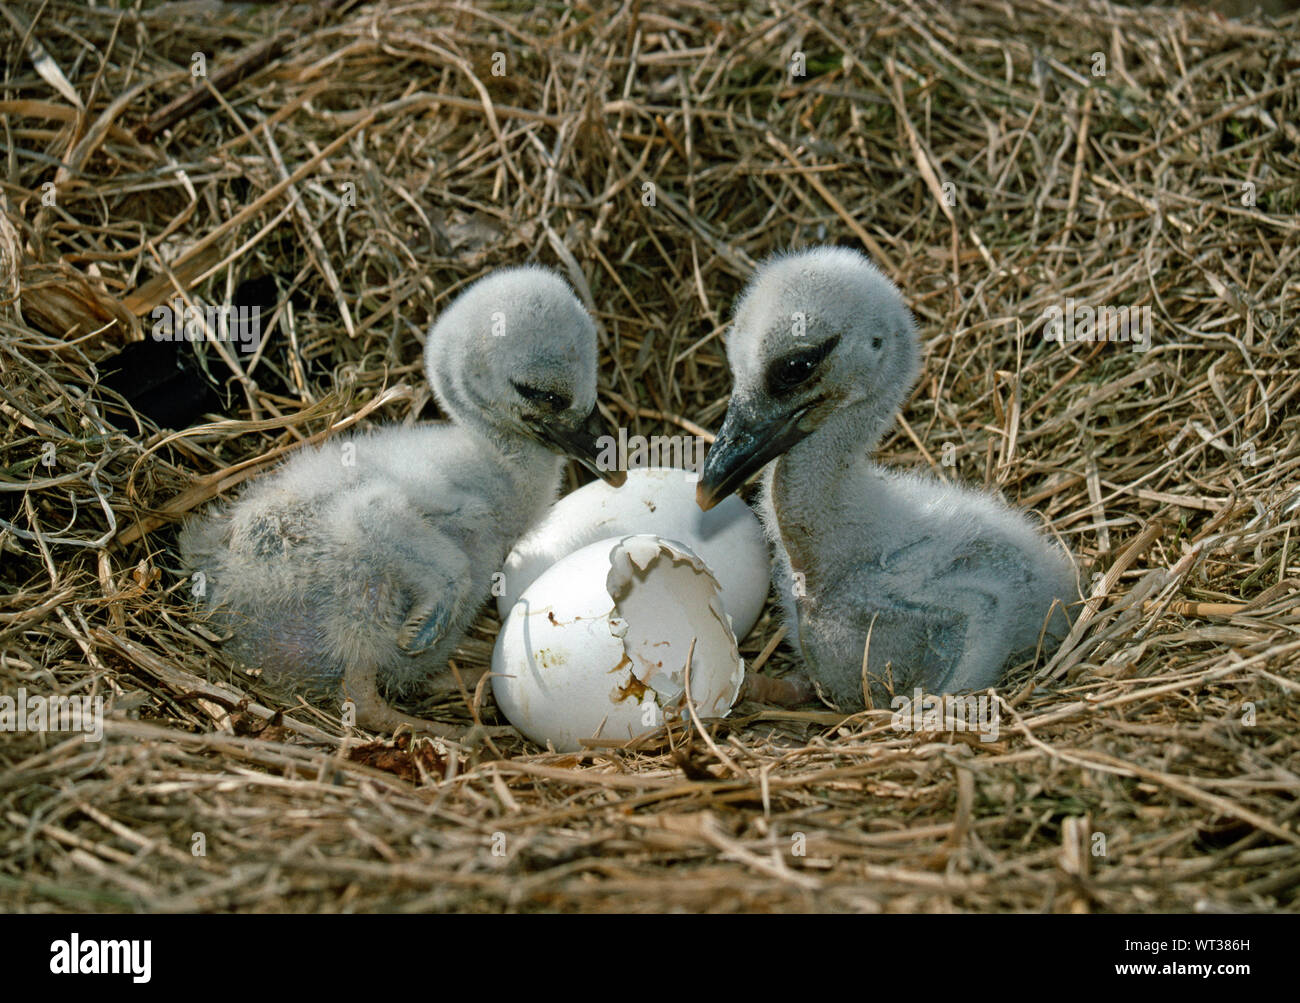 WHITE STORK CHICKS (Ciconia ciconia). Investigating egg shell from which one of them must have hatched. Young from a third egg behind still to hatch. Stock Photo